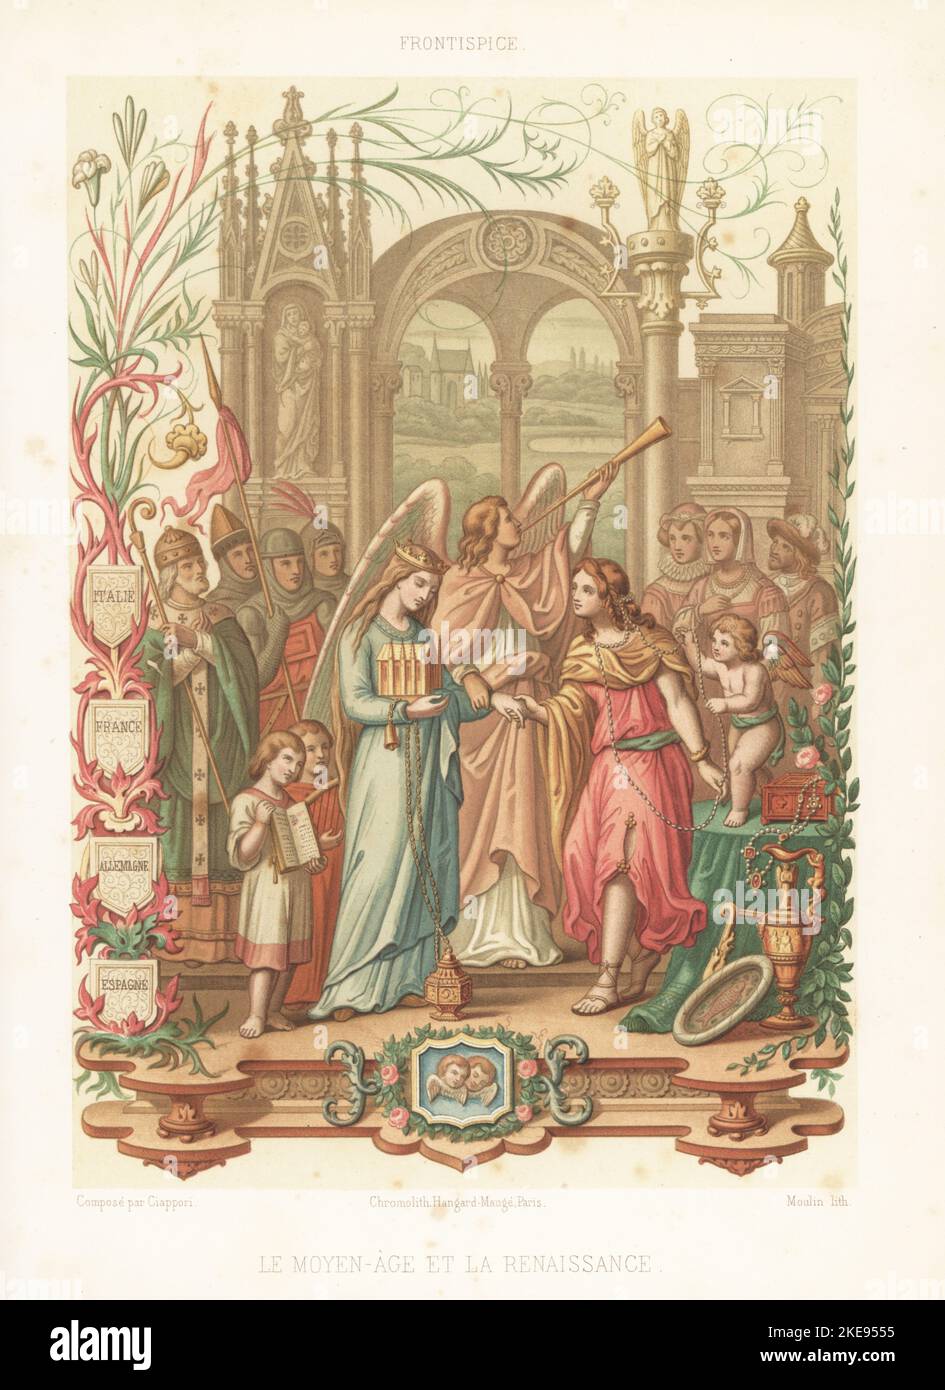 Allegorical frontispiece with figures of the Middle Ages and the Renaissance meeting. A herald angel with trumpet introduces them. Bishops, soldiers, page boys, courtiers watch them. Four shields at left inscribed Italy, France, Germany, Spain. Chromolithograph by Moulin after an illustration by Claudius Joseph Ciappori from Volume II of Charles Louandre’s Les Arts Somptuaires, The Sumptuary Arts, Hangard-Mauge, Paris, 1858. Stock Photo